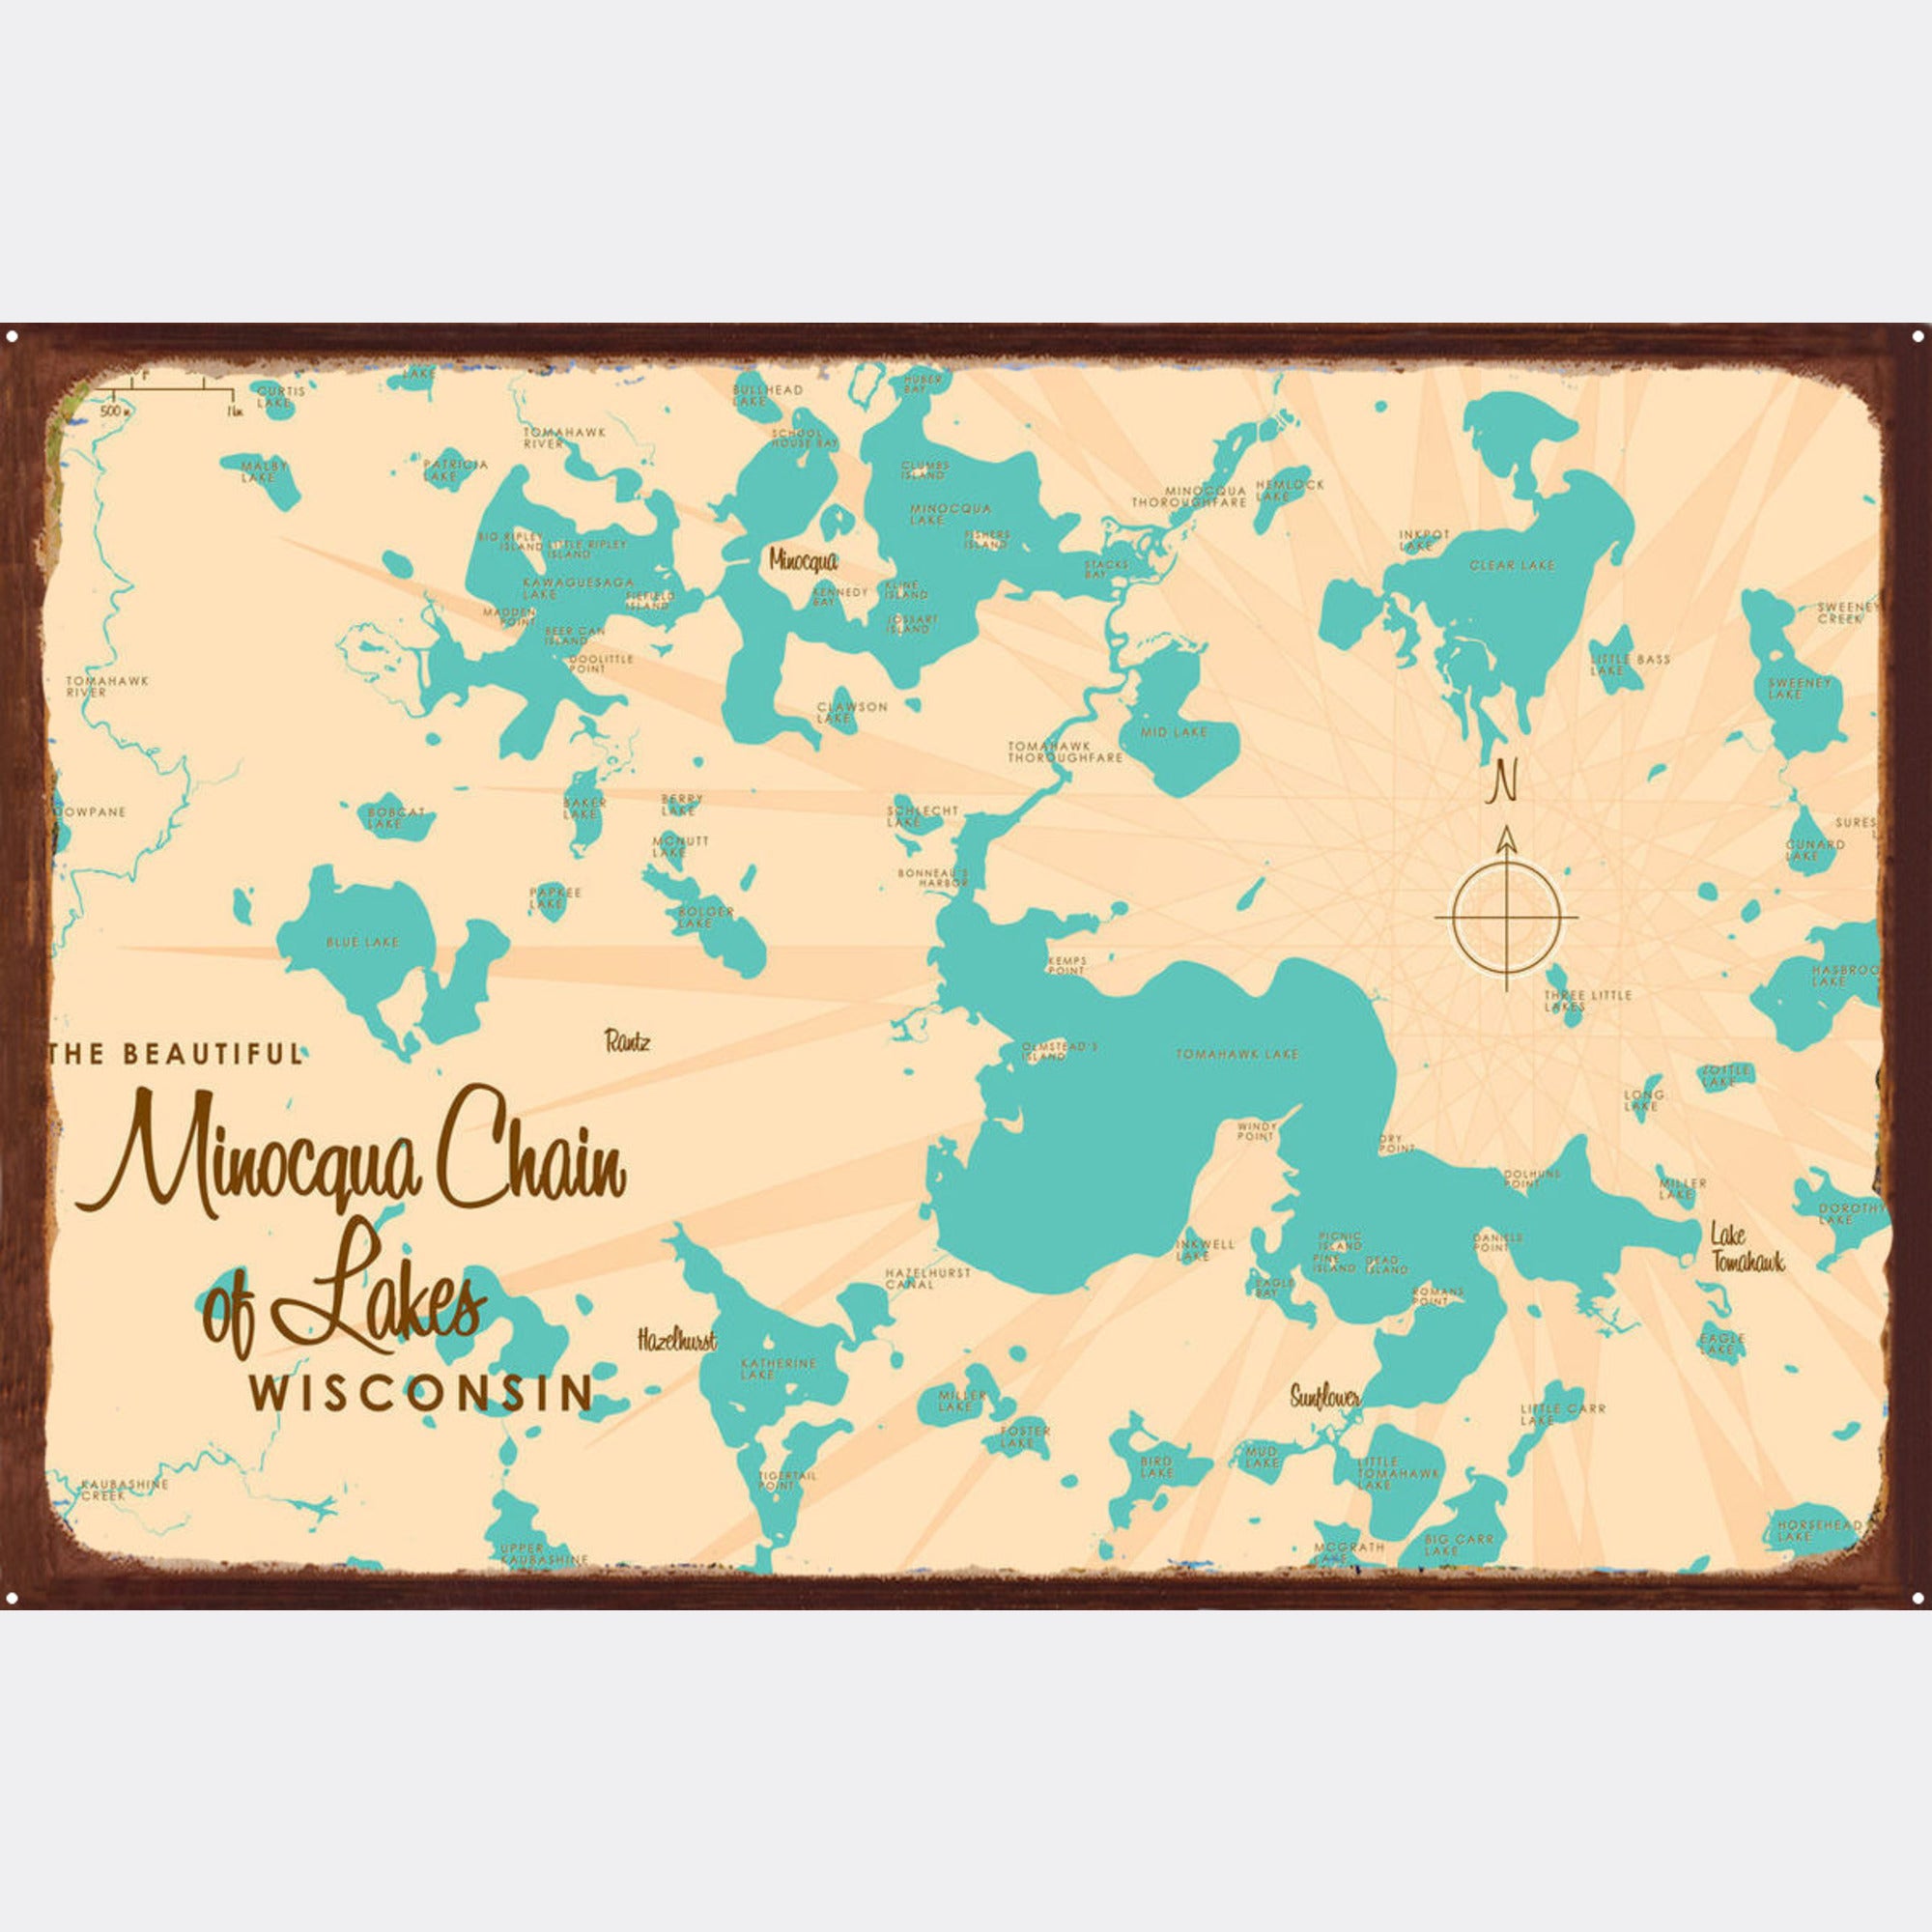 Minocqua Chain of Lakes Wisconsin, Rustic Metal Sign Map Art